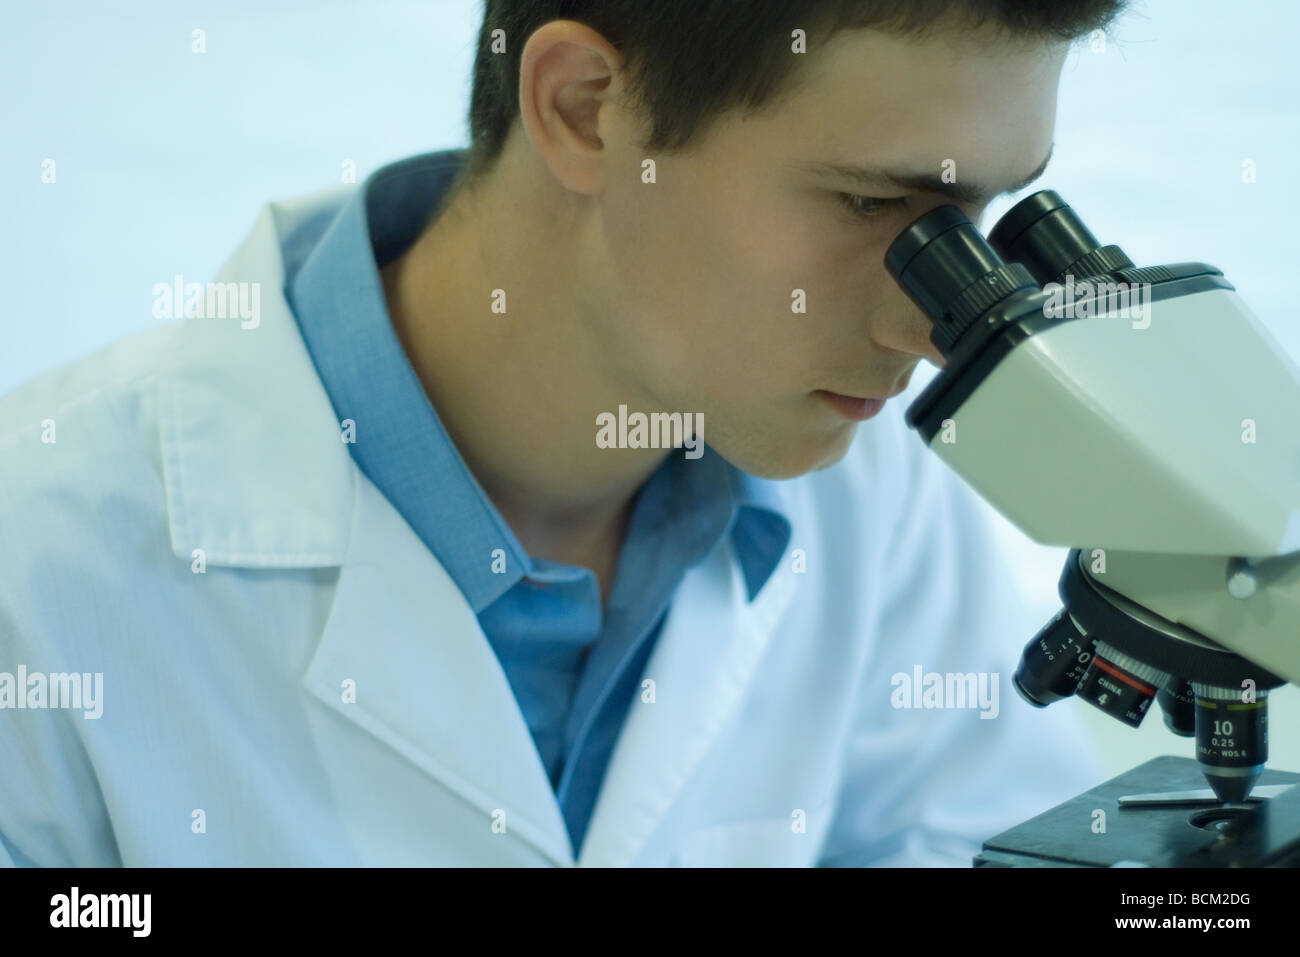 Male scientist looking through microscope, close-up Banque D'Images